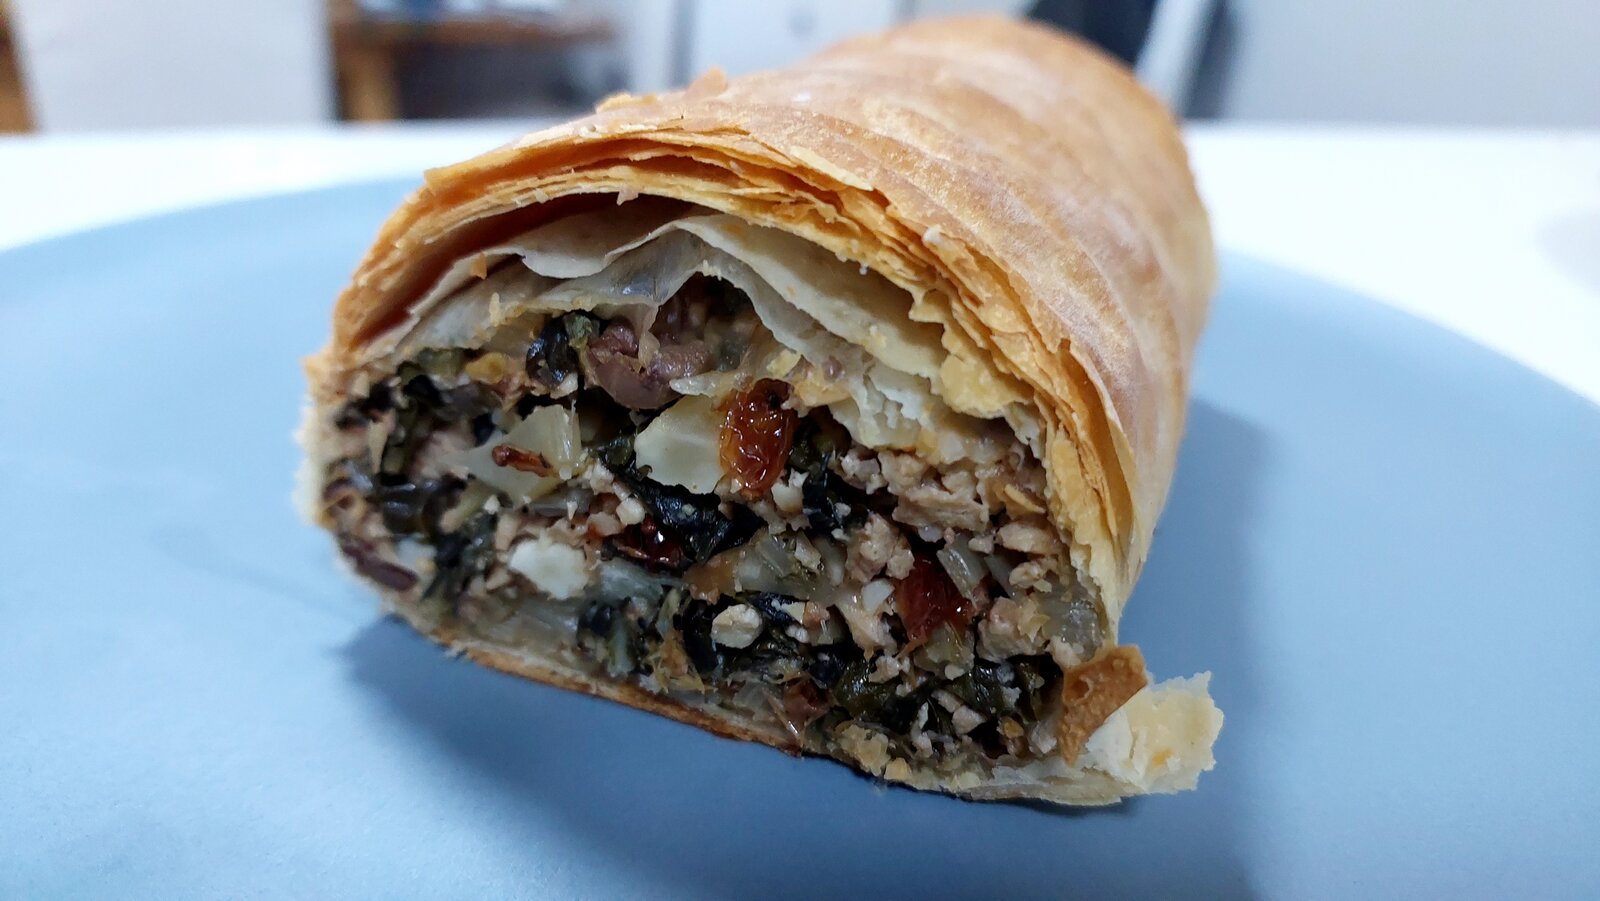 Vegan Swiss Chard Strudel with Tofu & Capers, Olives and....